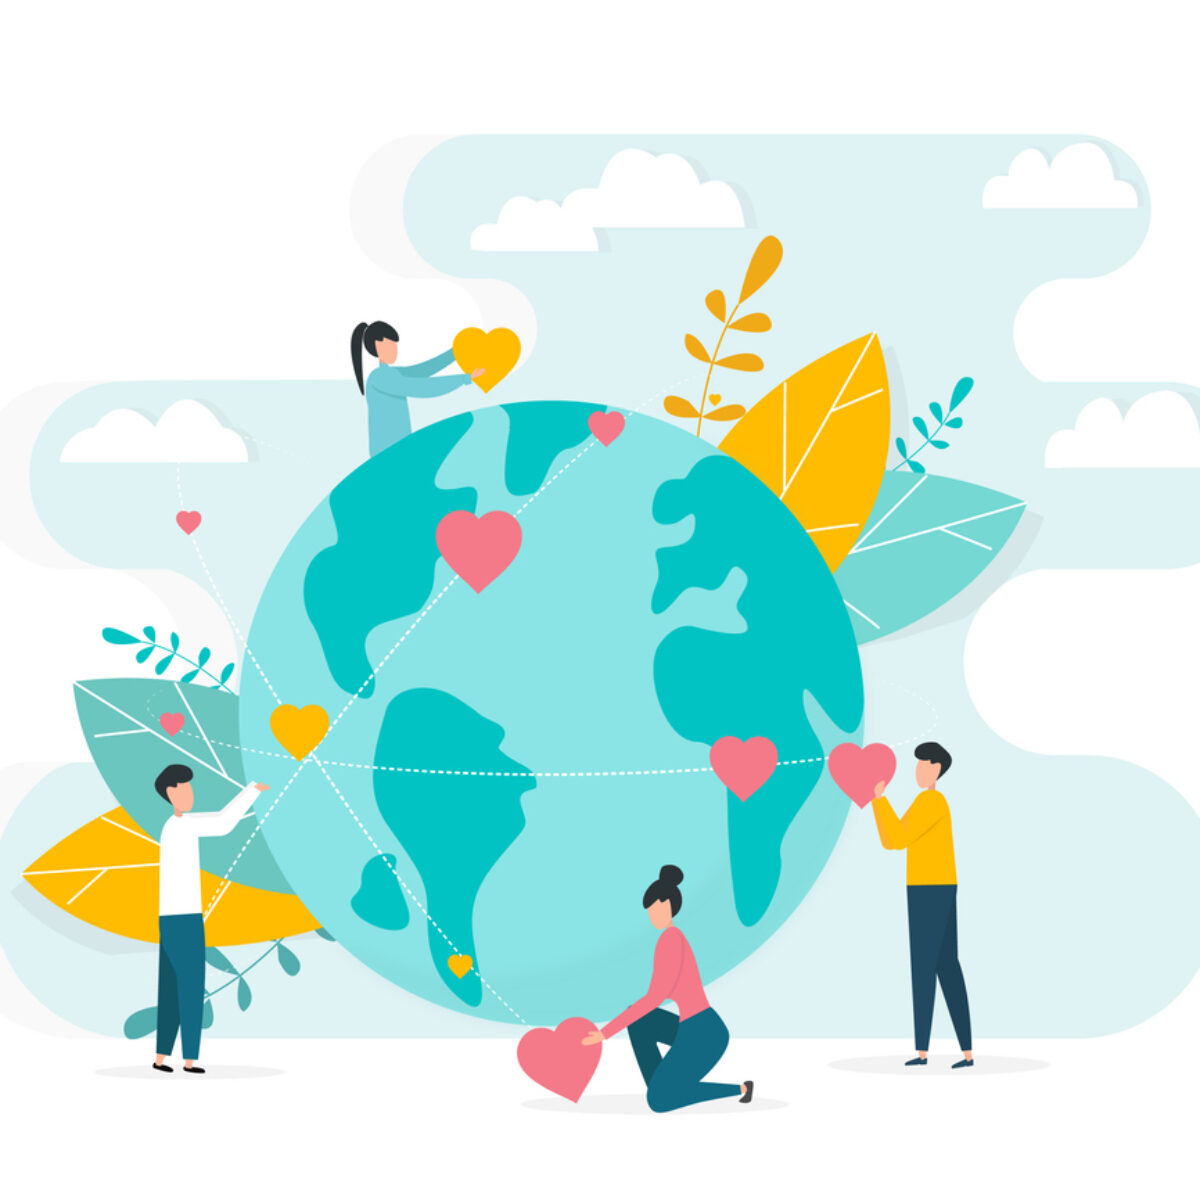 Worldwide charity work concept. People surrounding planet Earth with love and care on white background, vector illustration in2d style.